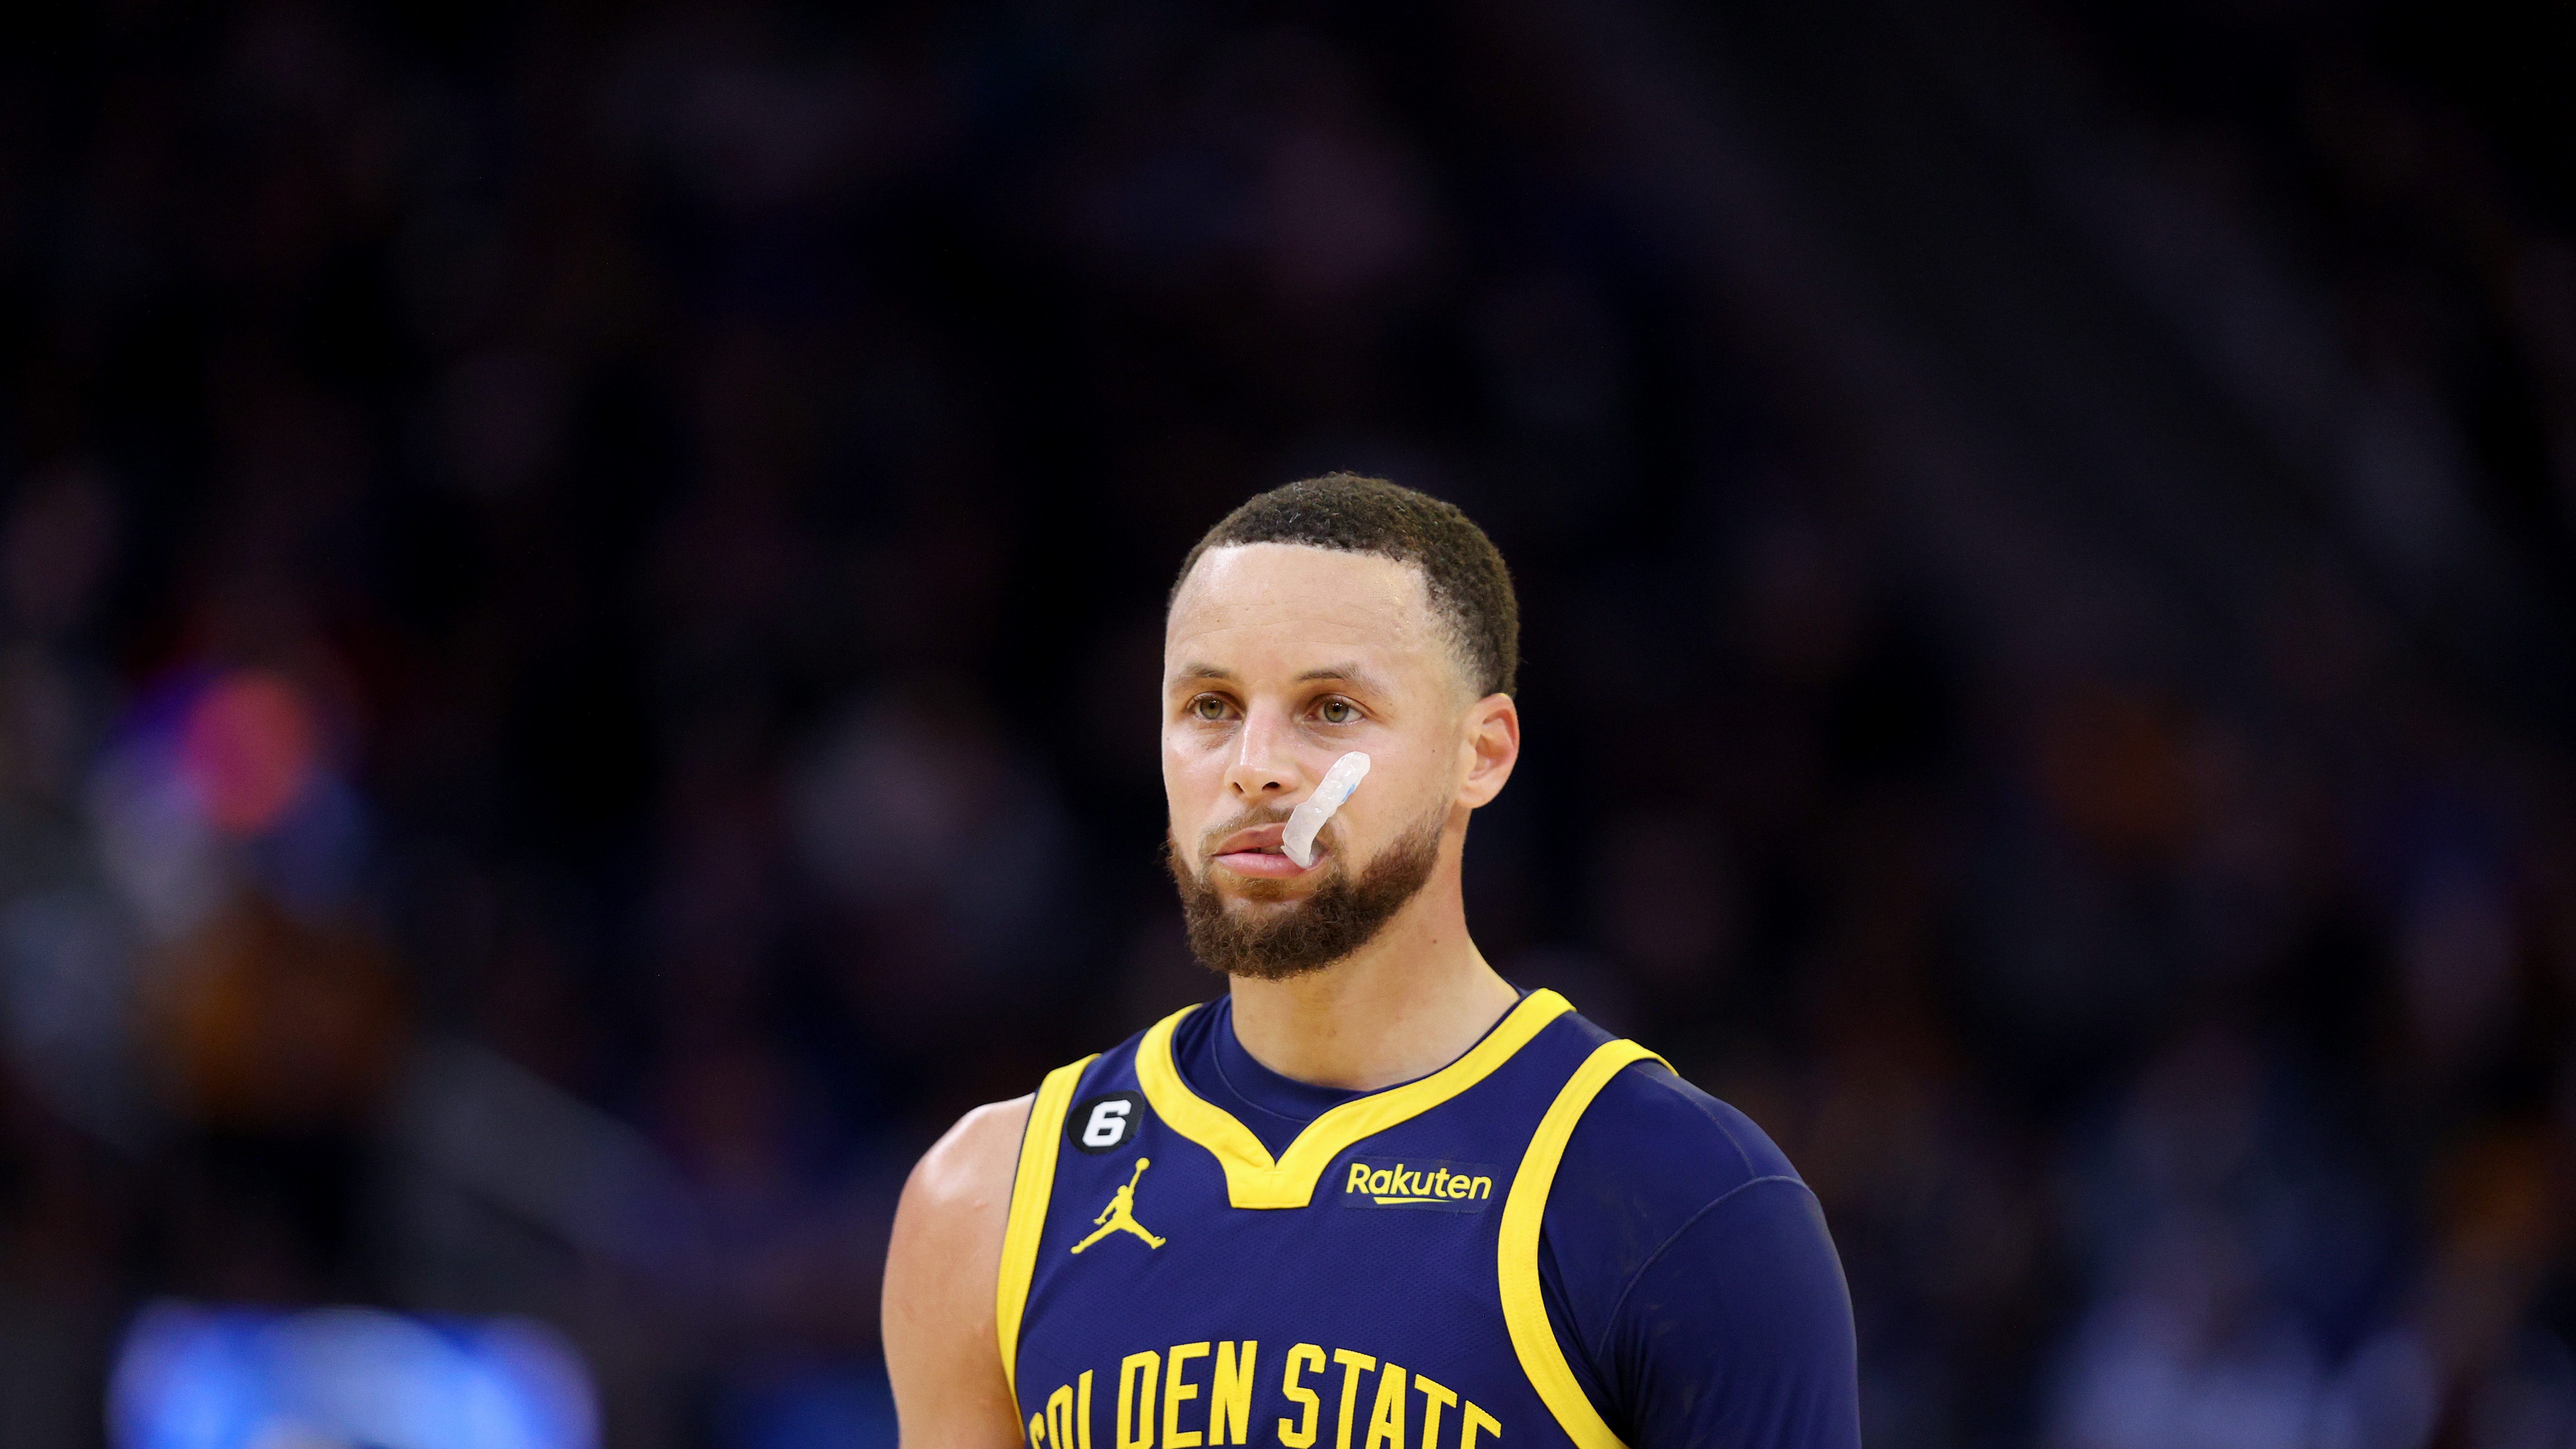 Steph Curry comeback: The Warriors star is playing like his old self.